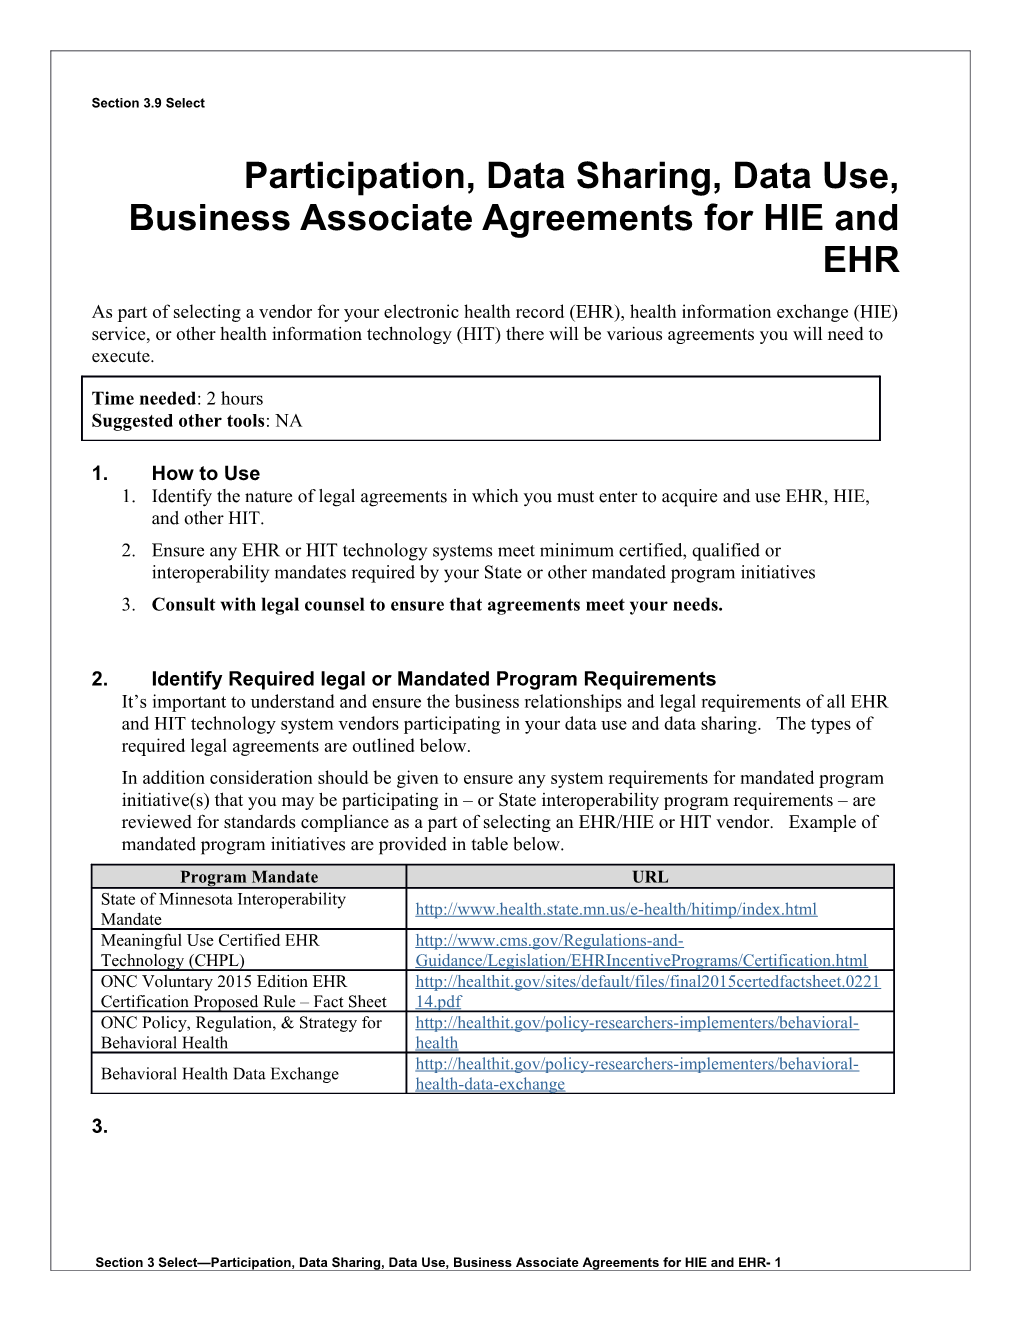 3 Participation, Data Sharing, Data Use, Business Associate Agreements for HIE and EHR